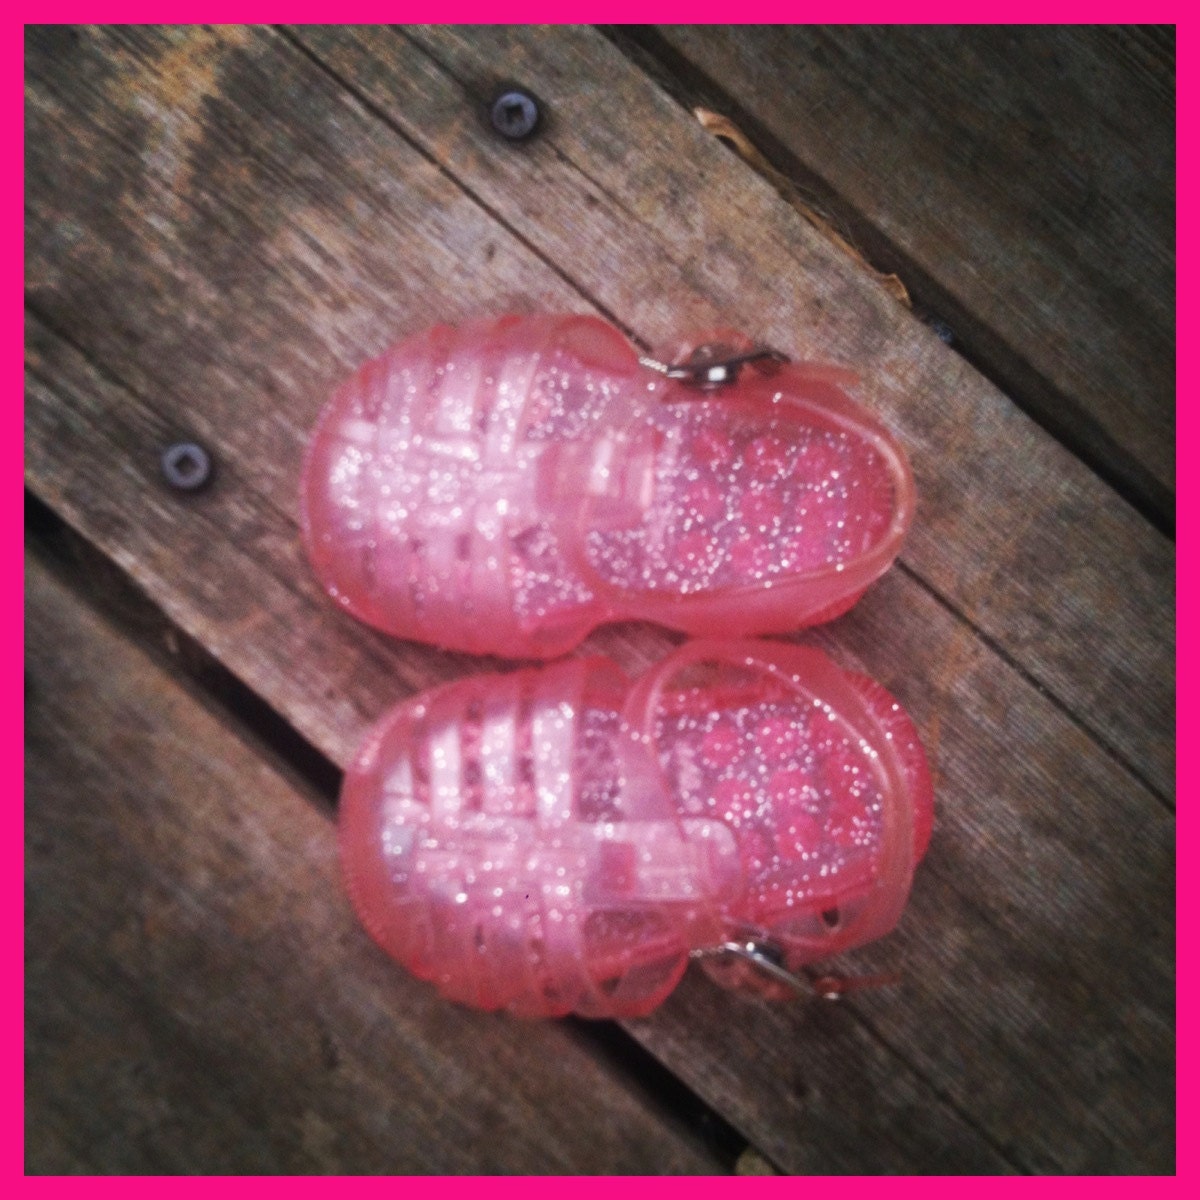 ... Infant Baby Girl Pink Sparkly Jelly Sandals Shoes Size 12 on Etsy